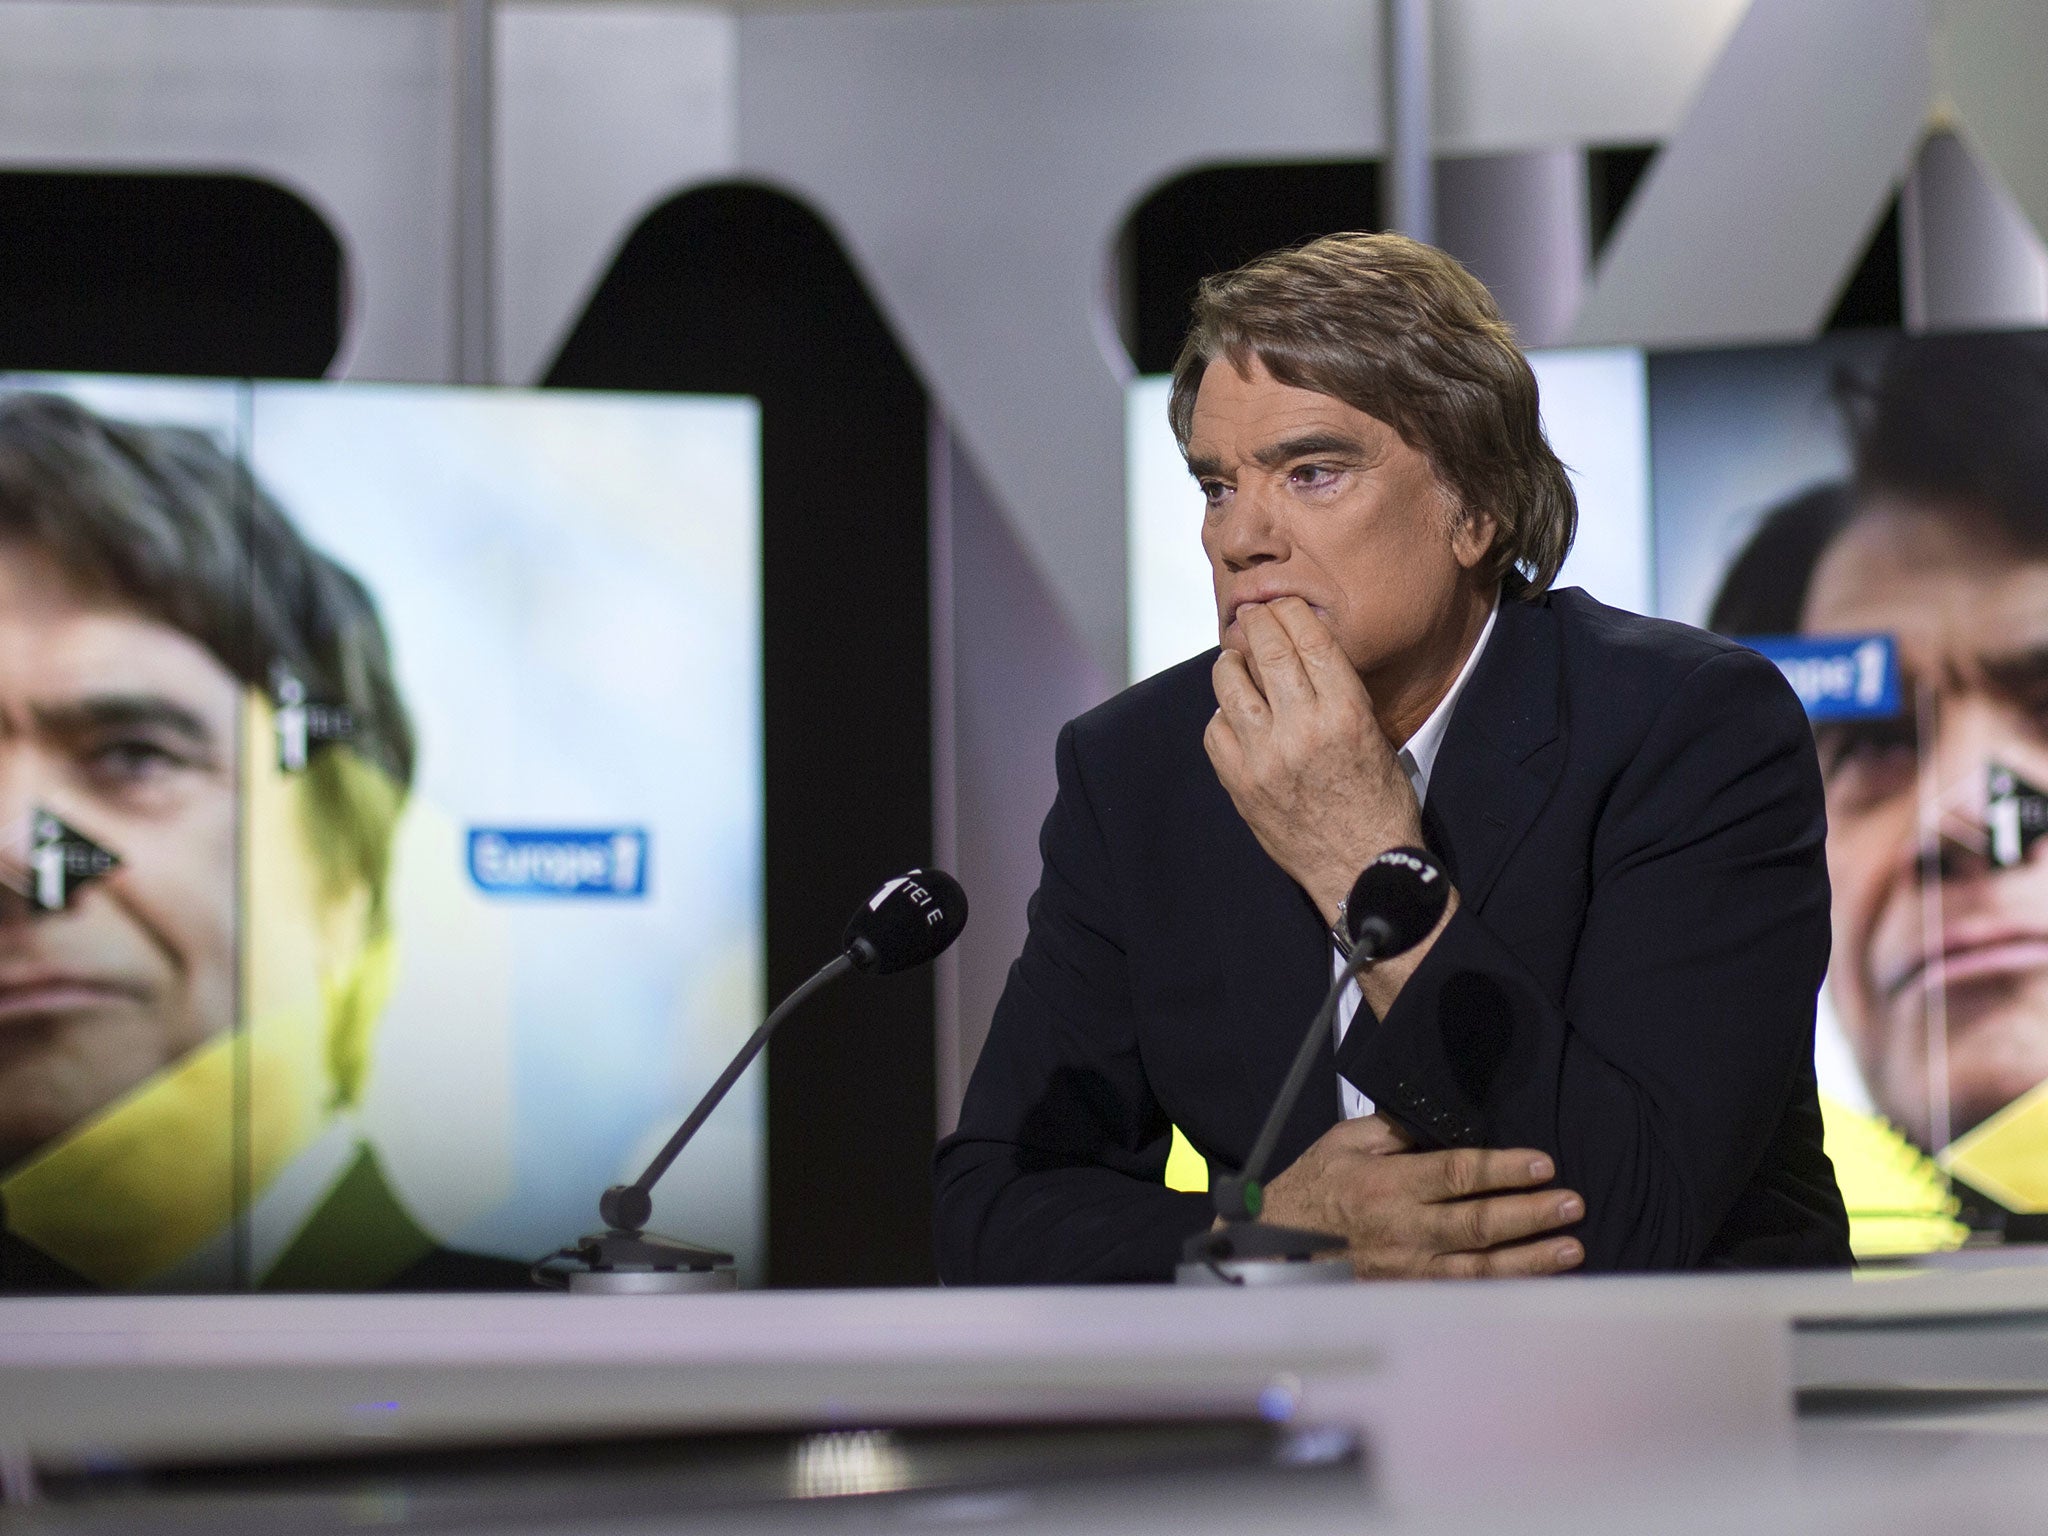 Embattled tycoon Bernard Tapie attends a broadcasted debate on French news channel iTele